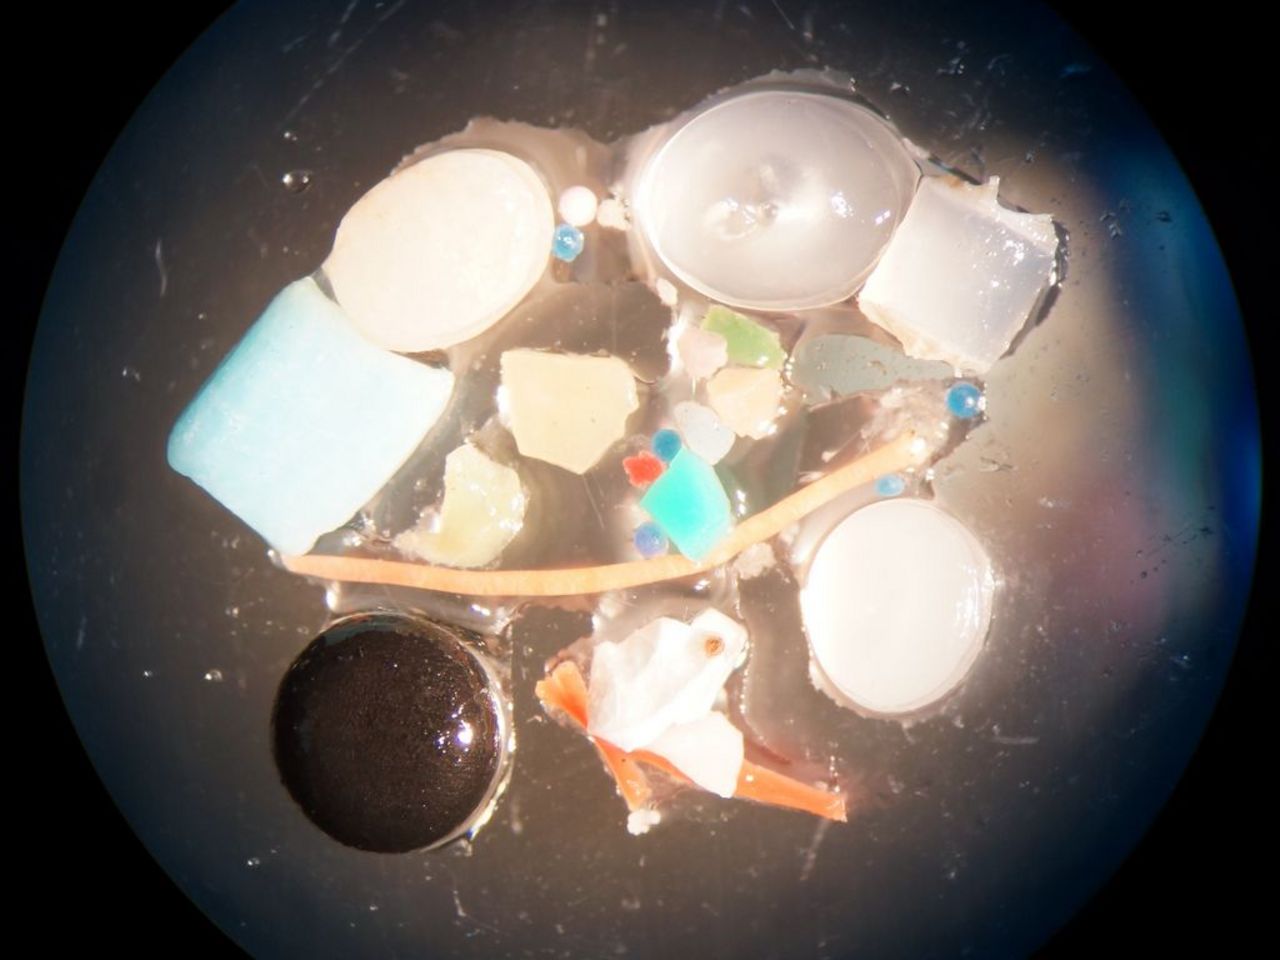 Various microplastic particles under the microscope